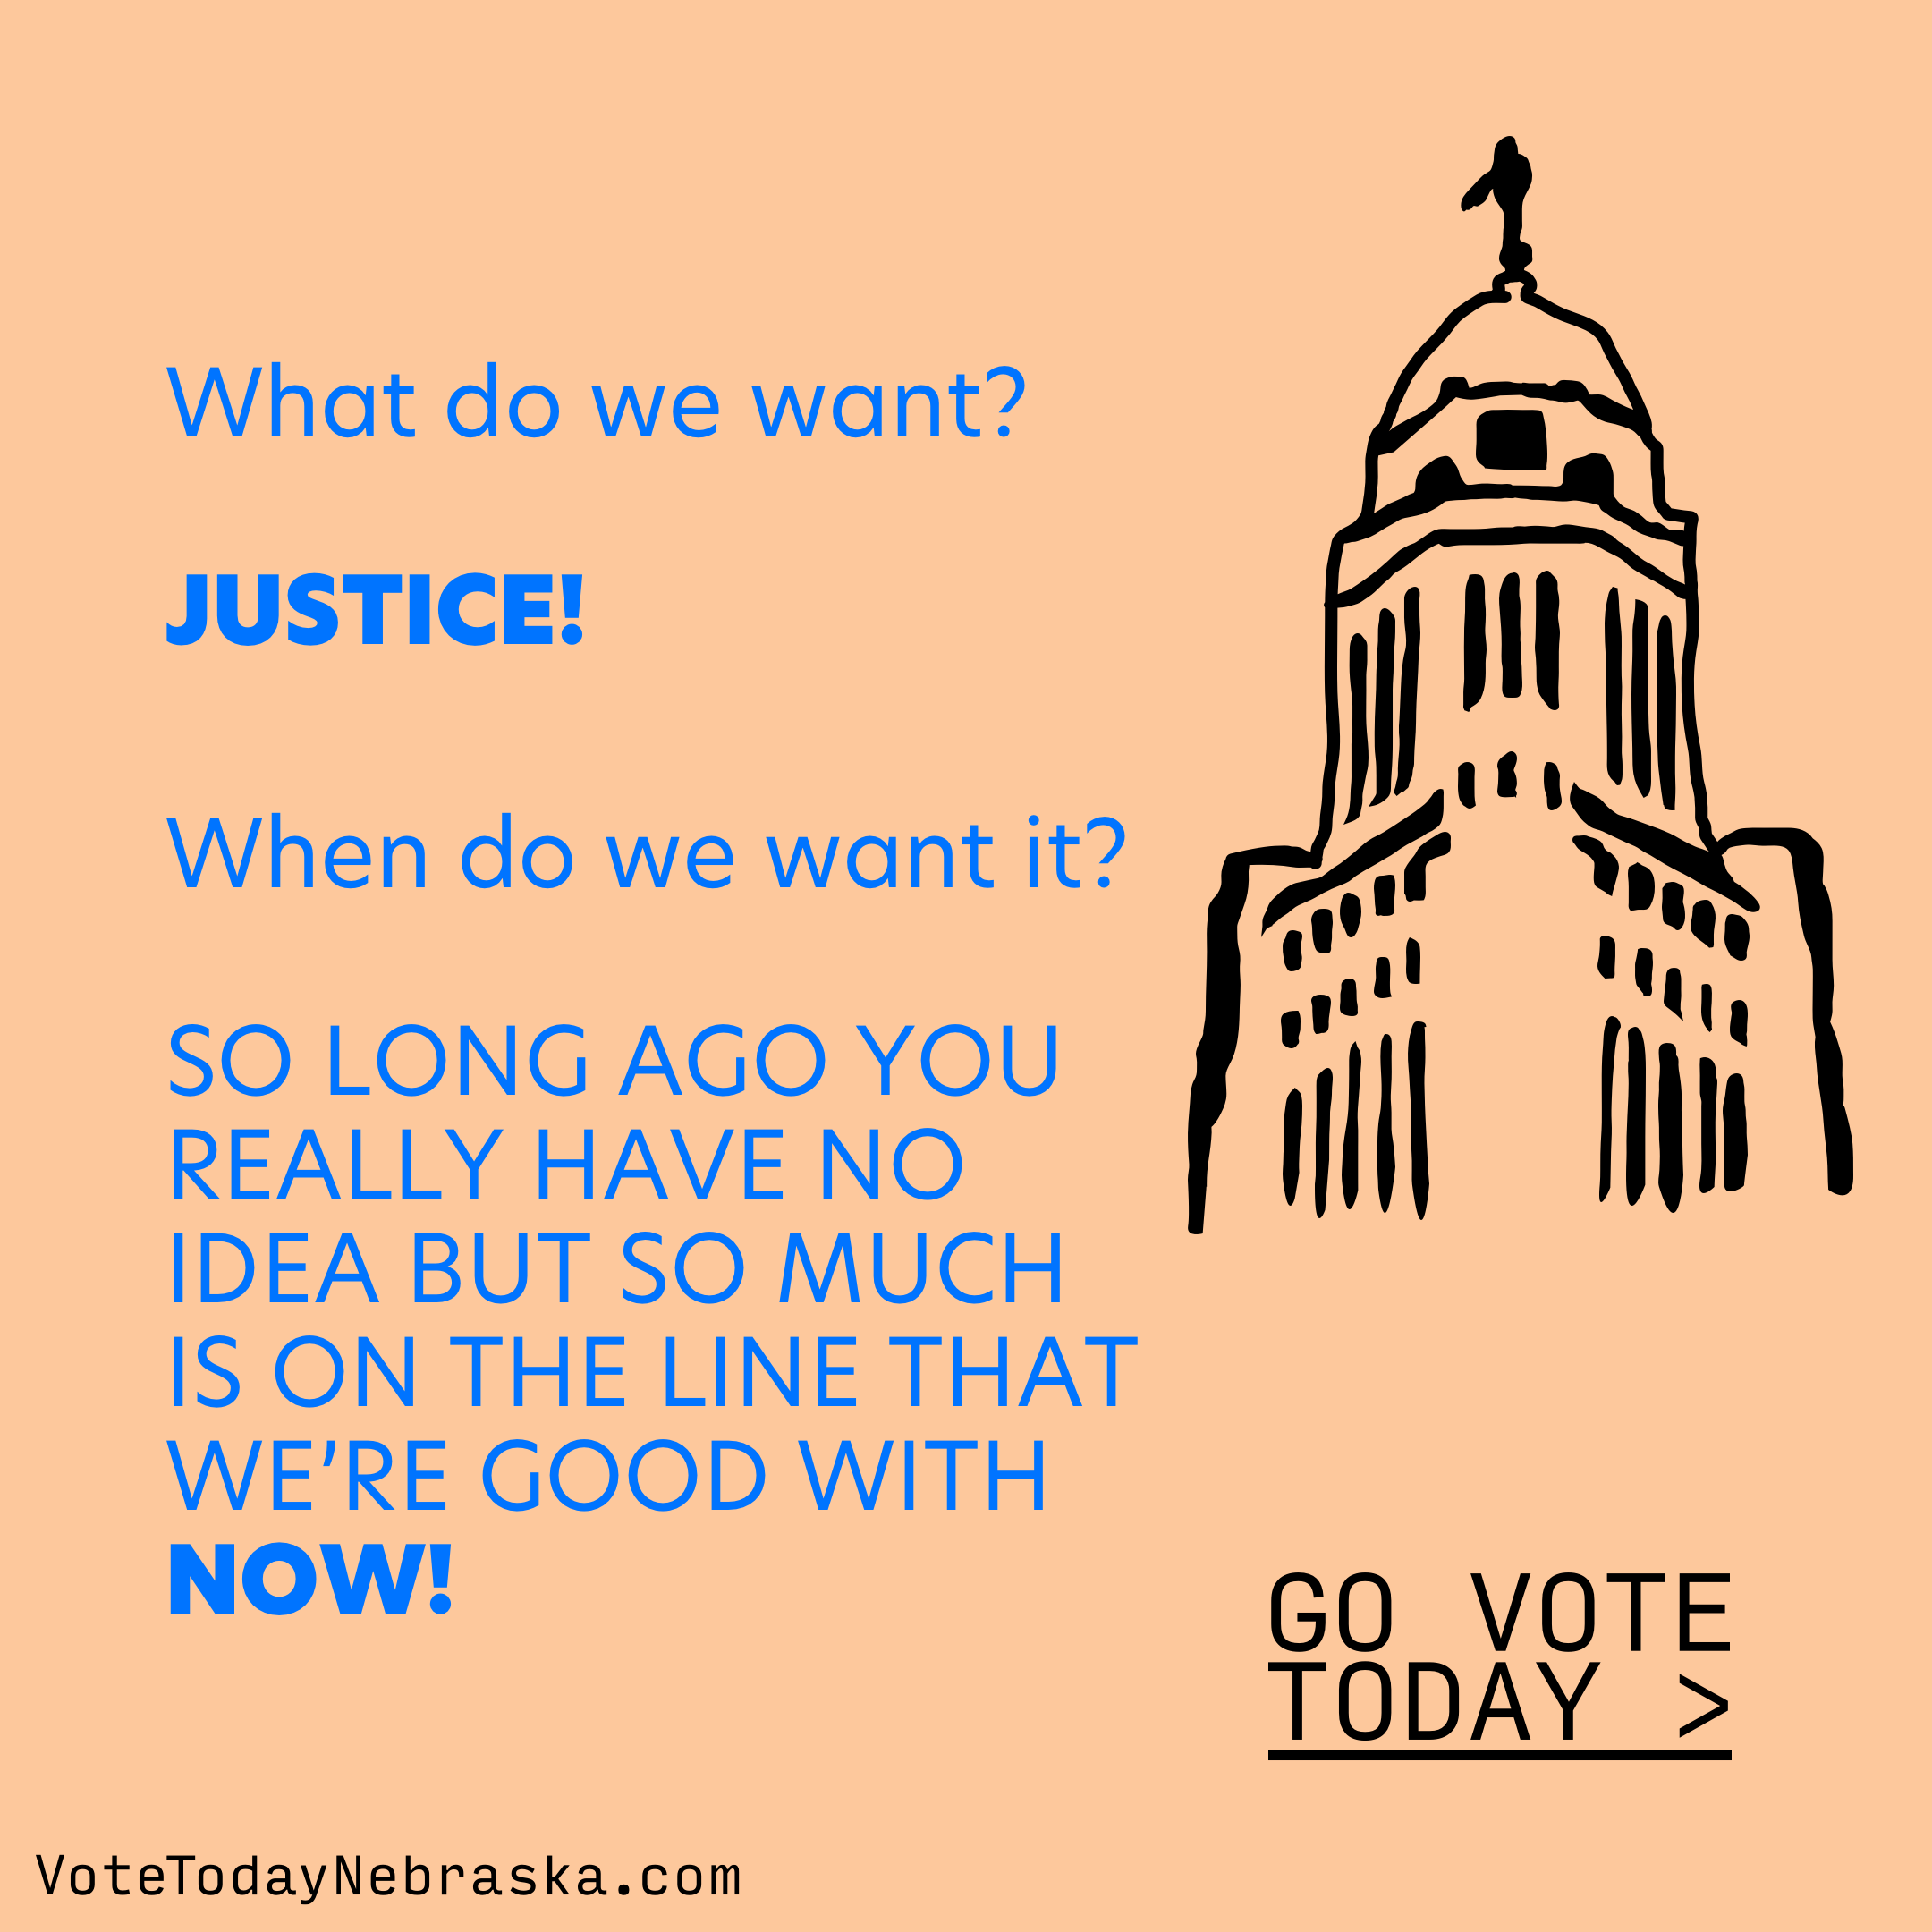 Drawing of Nebraska State Capital. What do we want? JUSTICE! When do we want it? SO LONG AGO YOU REALLY HAVE NO IDEA BUT SO MUCH IS ON THE LINE THAT WE'RE GOOD WITH NOW!